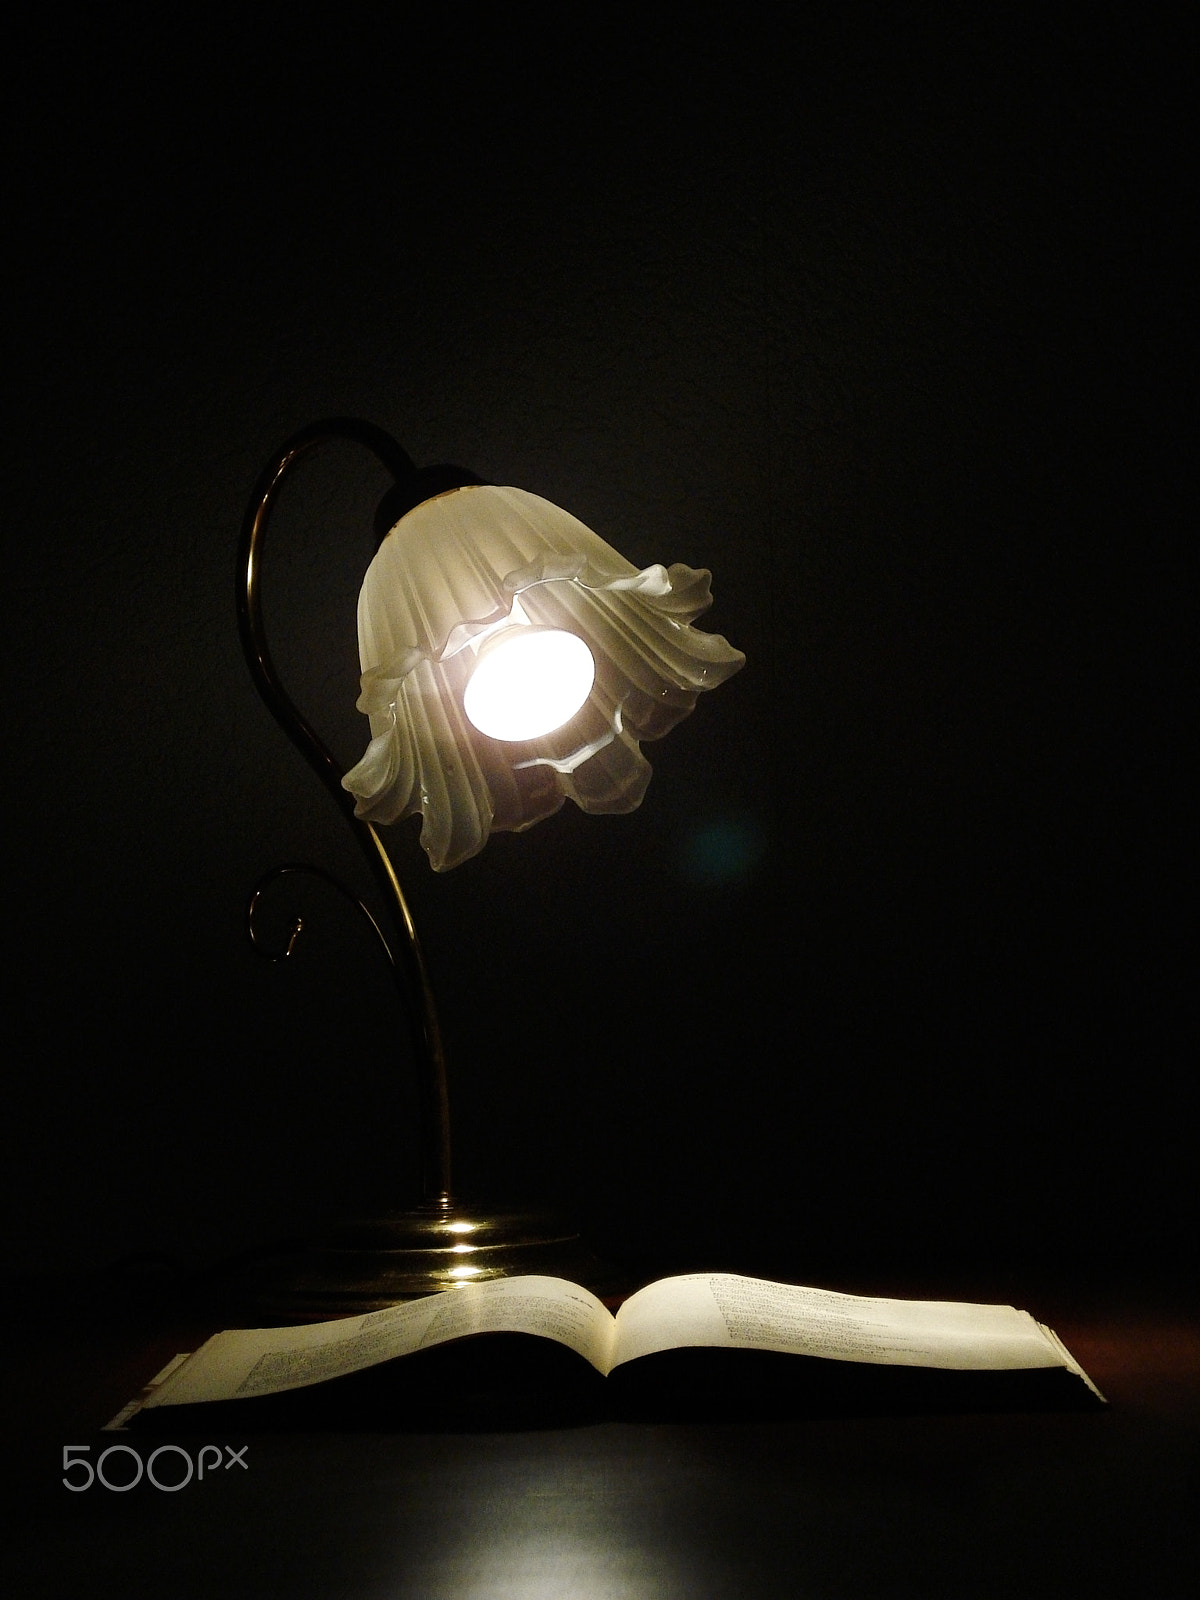 Sony DSC-W70 sample photo. Still life with the book and a lamp in a dark key photography